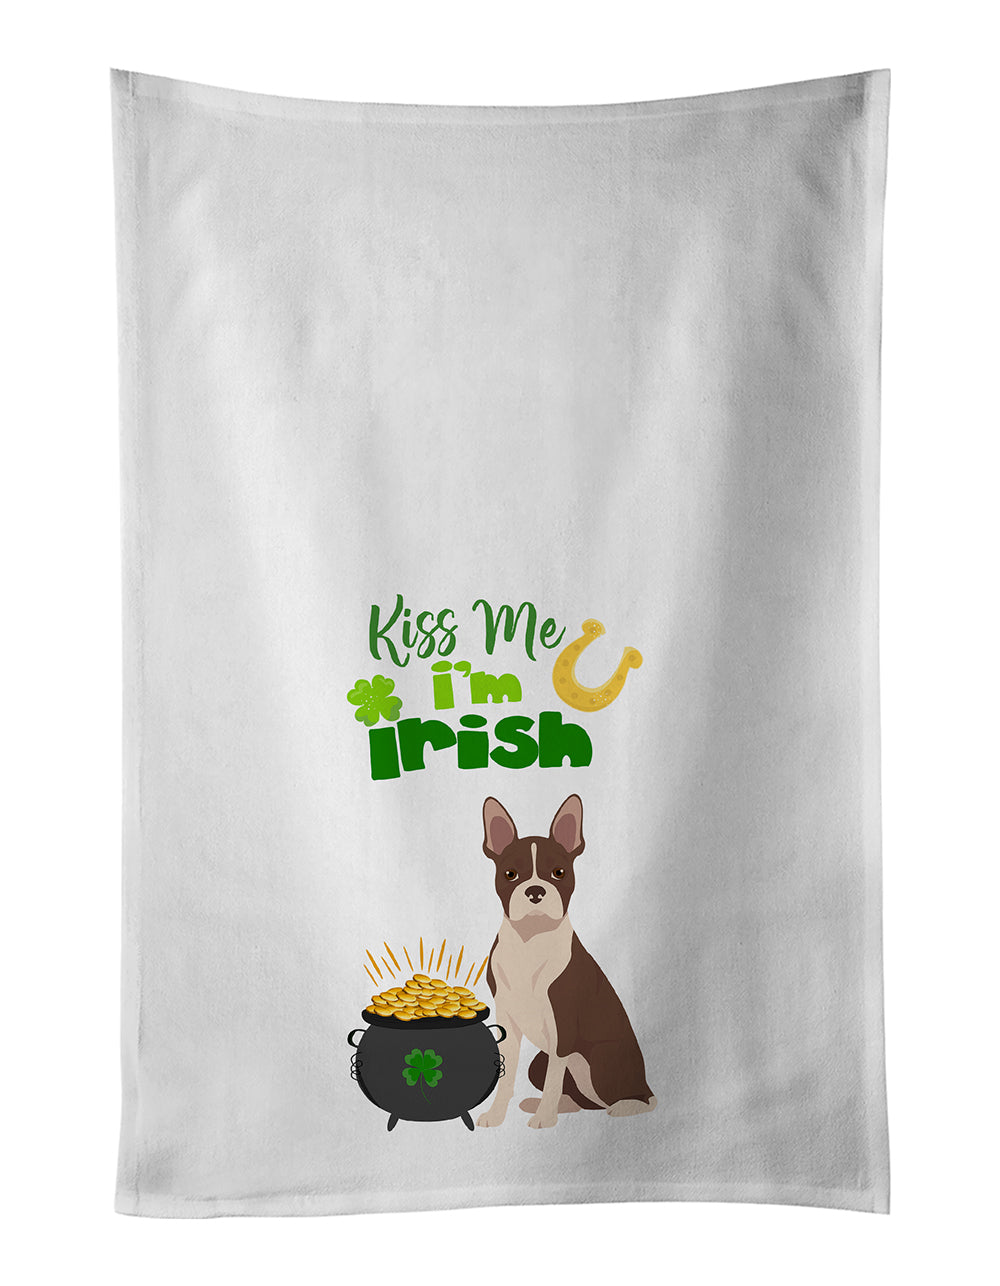 Buy this Red Boston Terrier St. Patrick's Day White Kitchen Towel Set of 2 Dish Towels